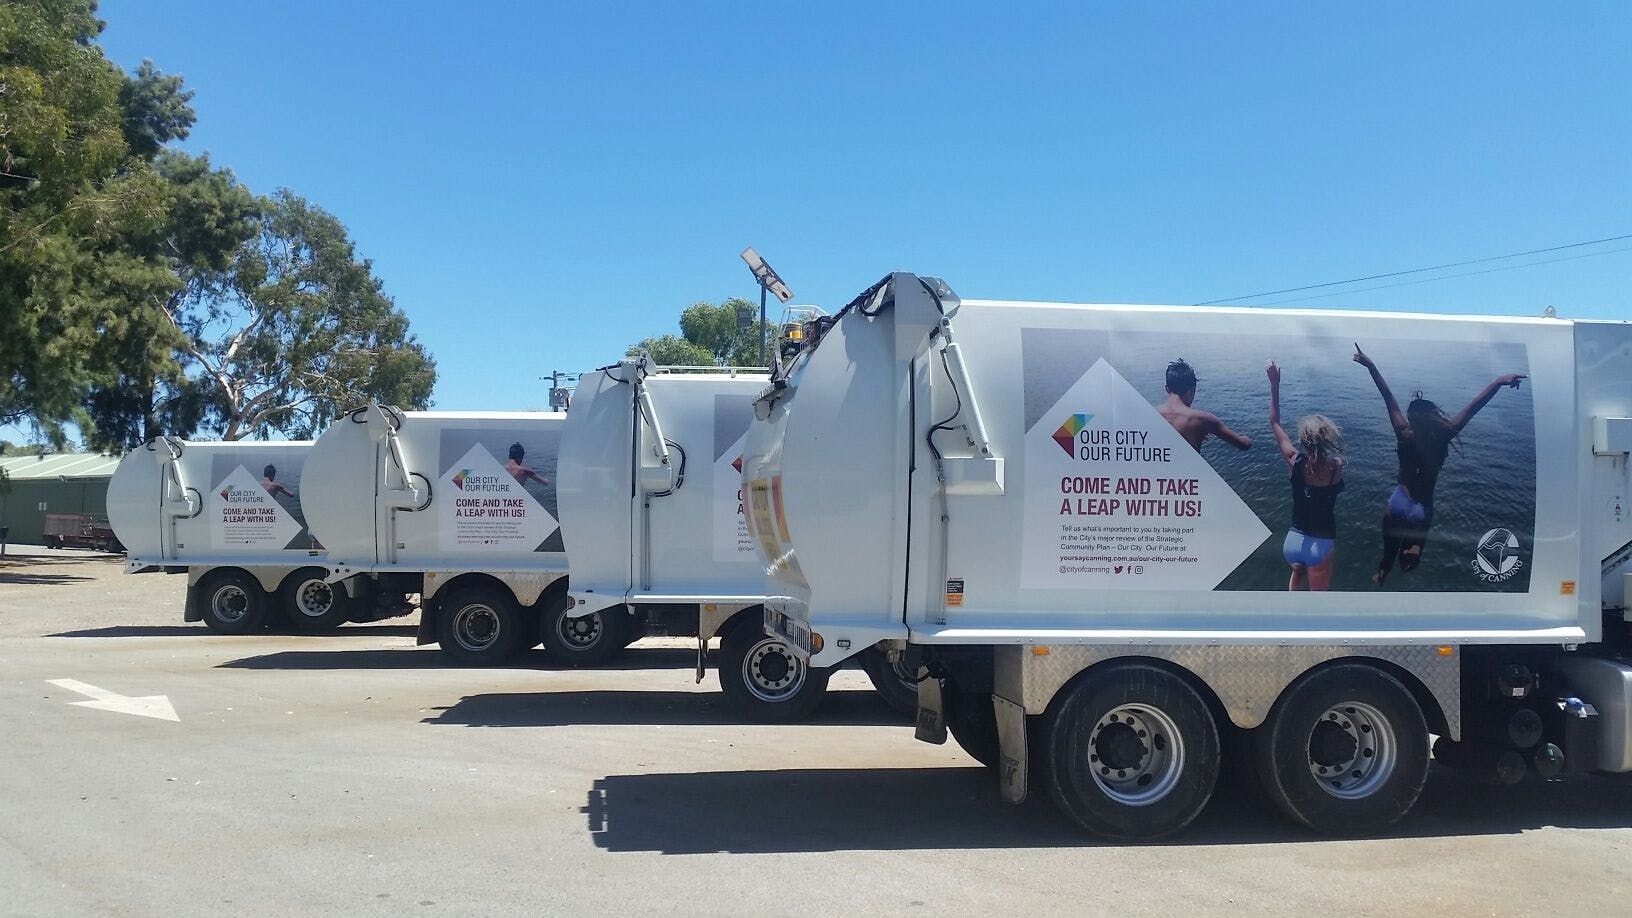 Keep an eye out for the City of Canning Rubbish Trucks with Our City: Our Future in your suburb